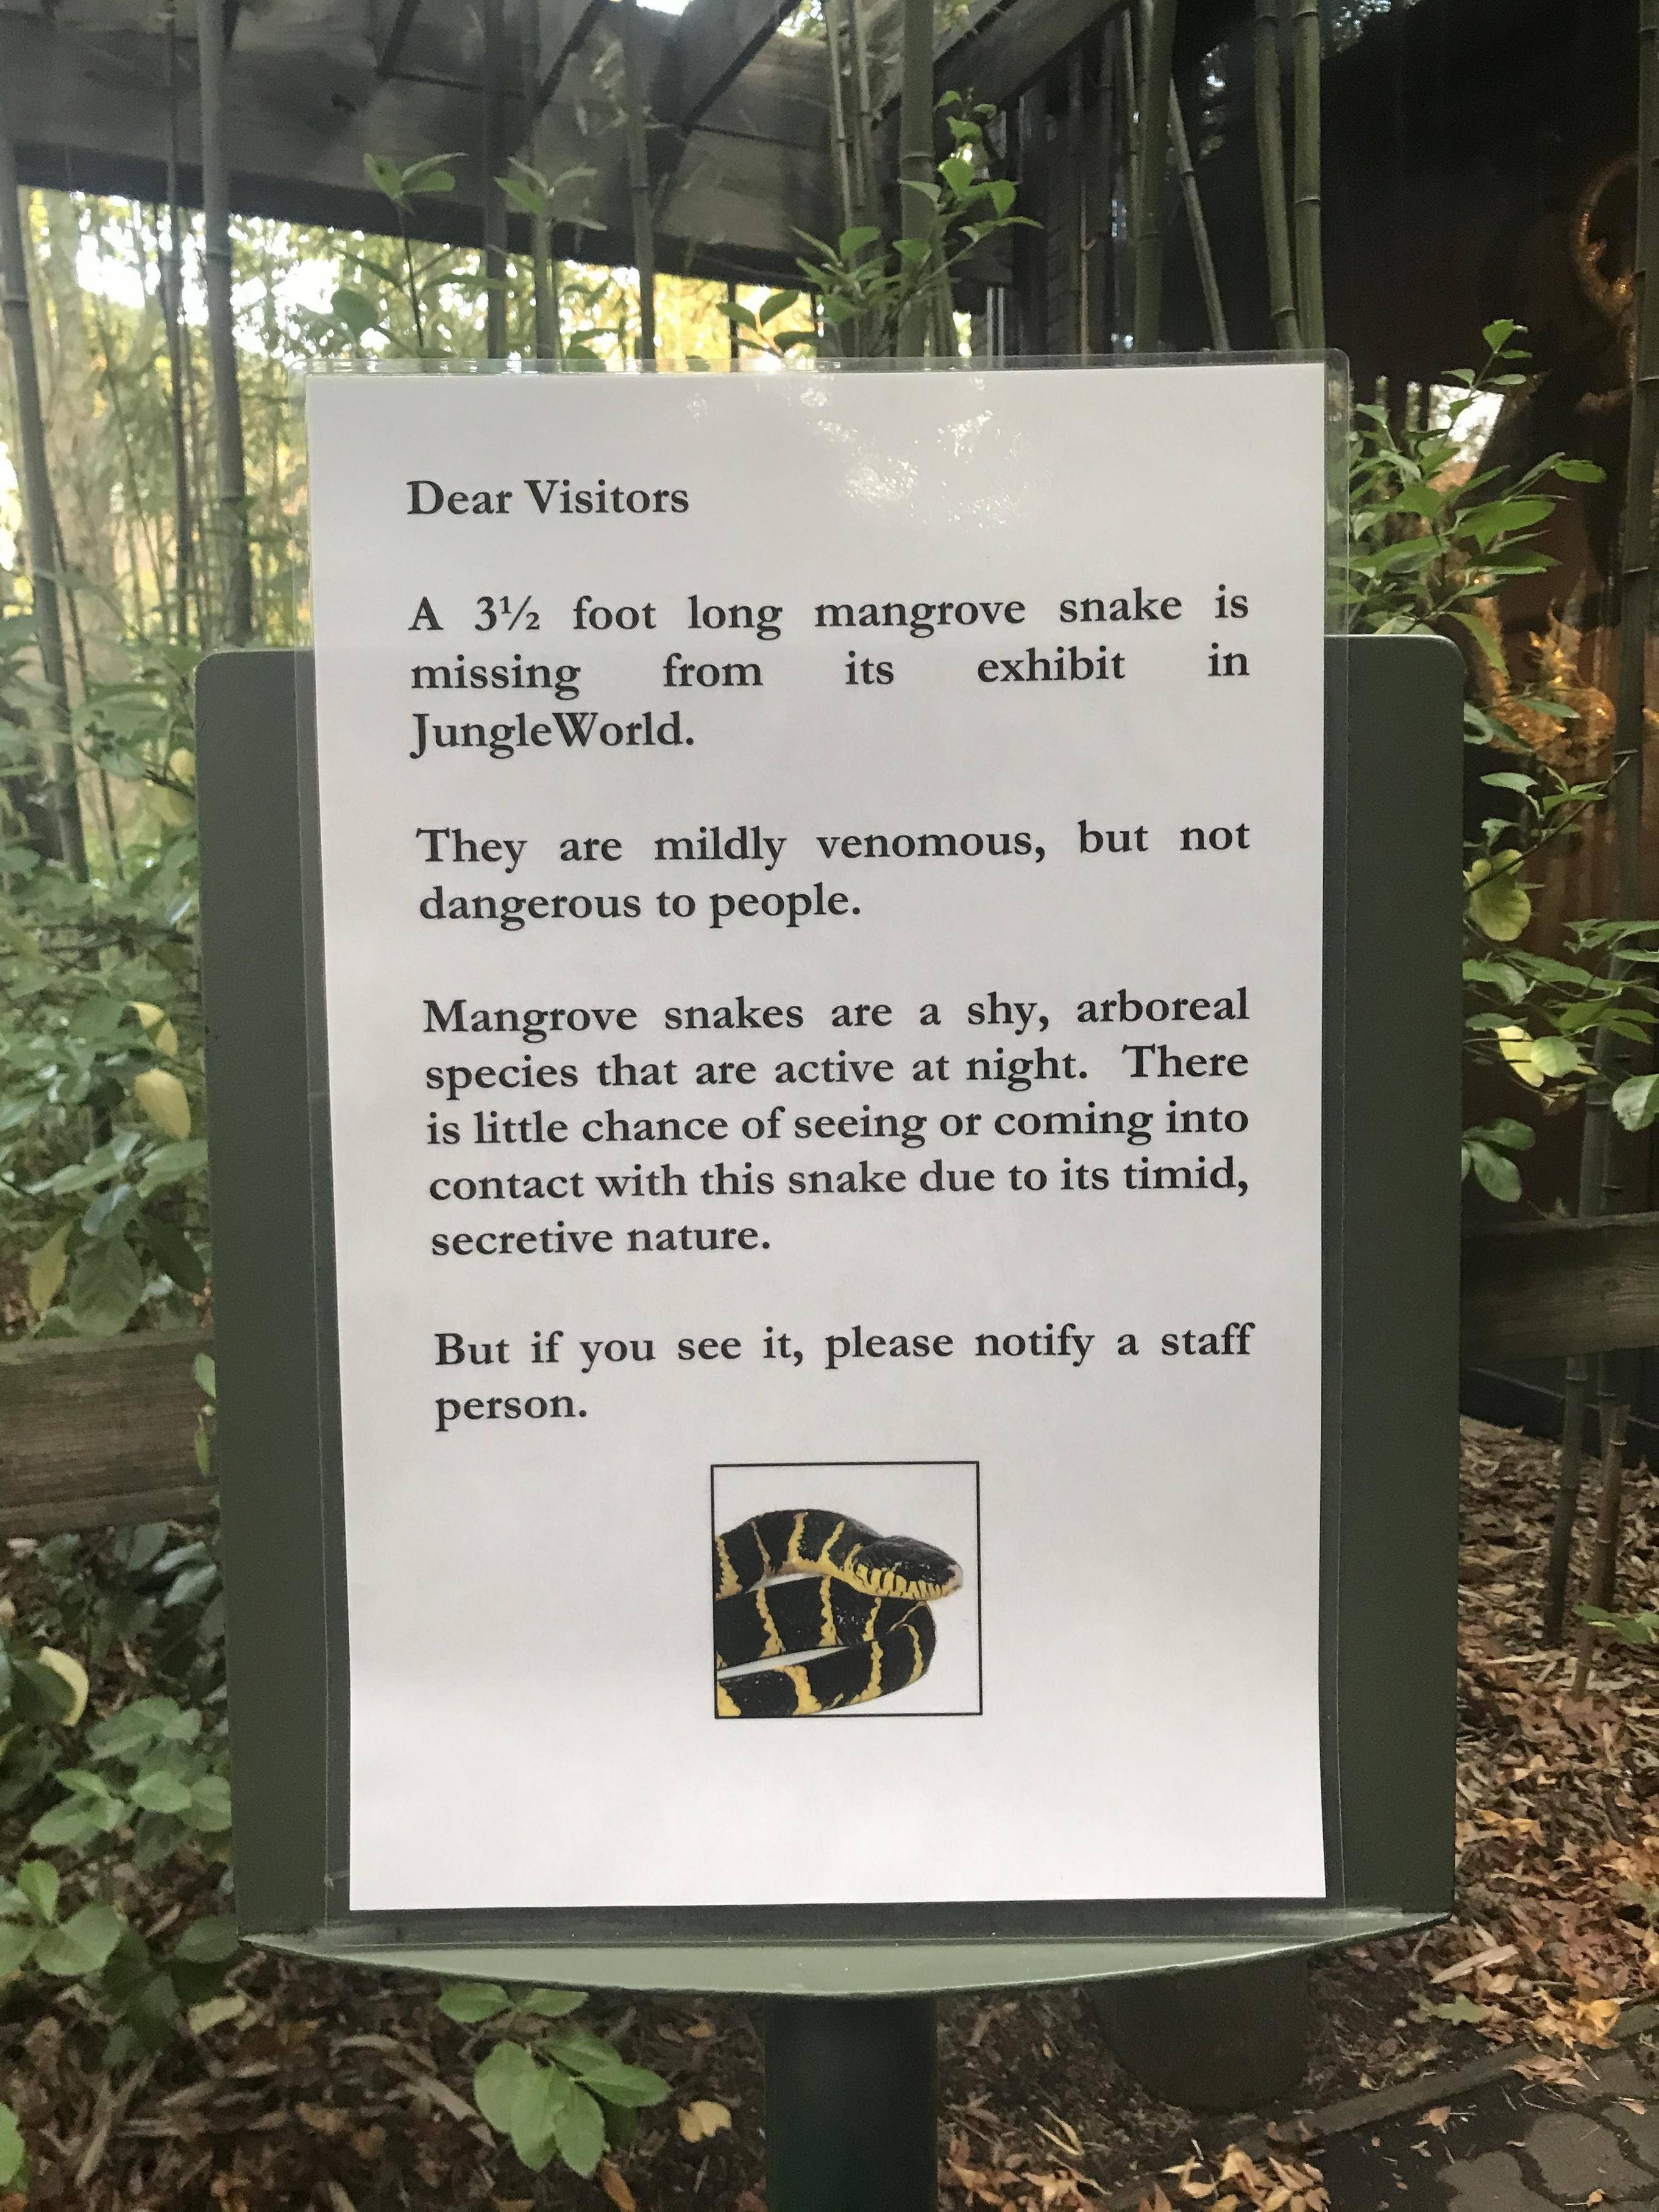 Meanwhile, at The Bronx Zoo...